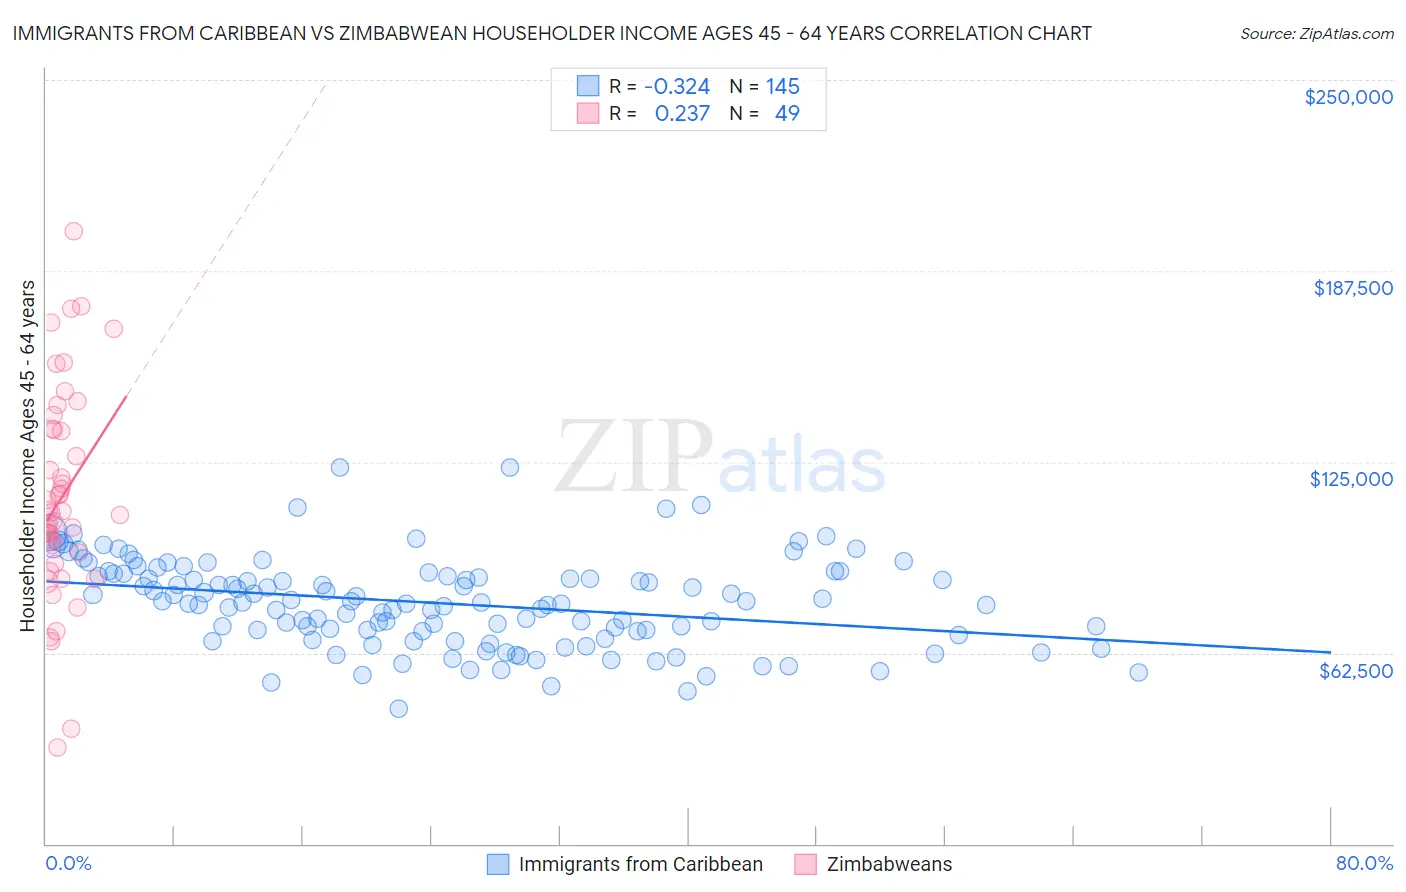 Immigrants from Caribbean vs Zimbabwean Householder Income Ages 45 - 64 years